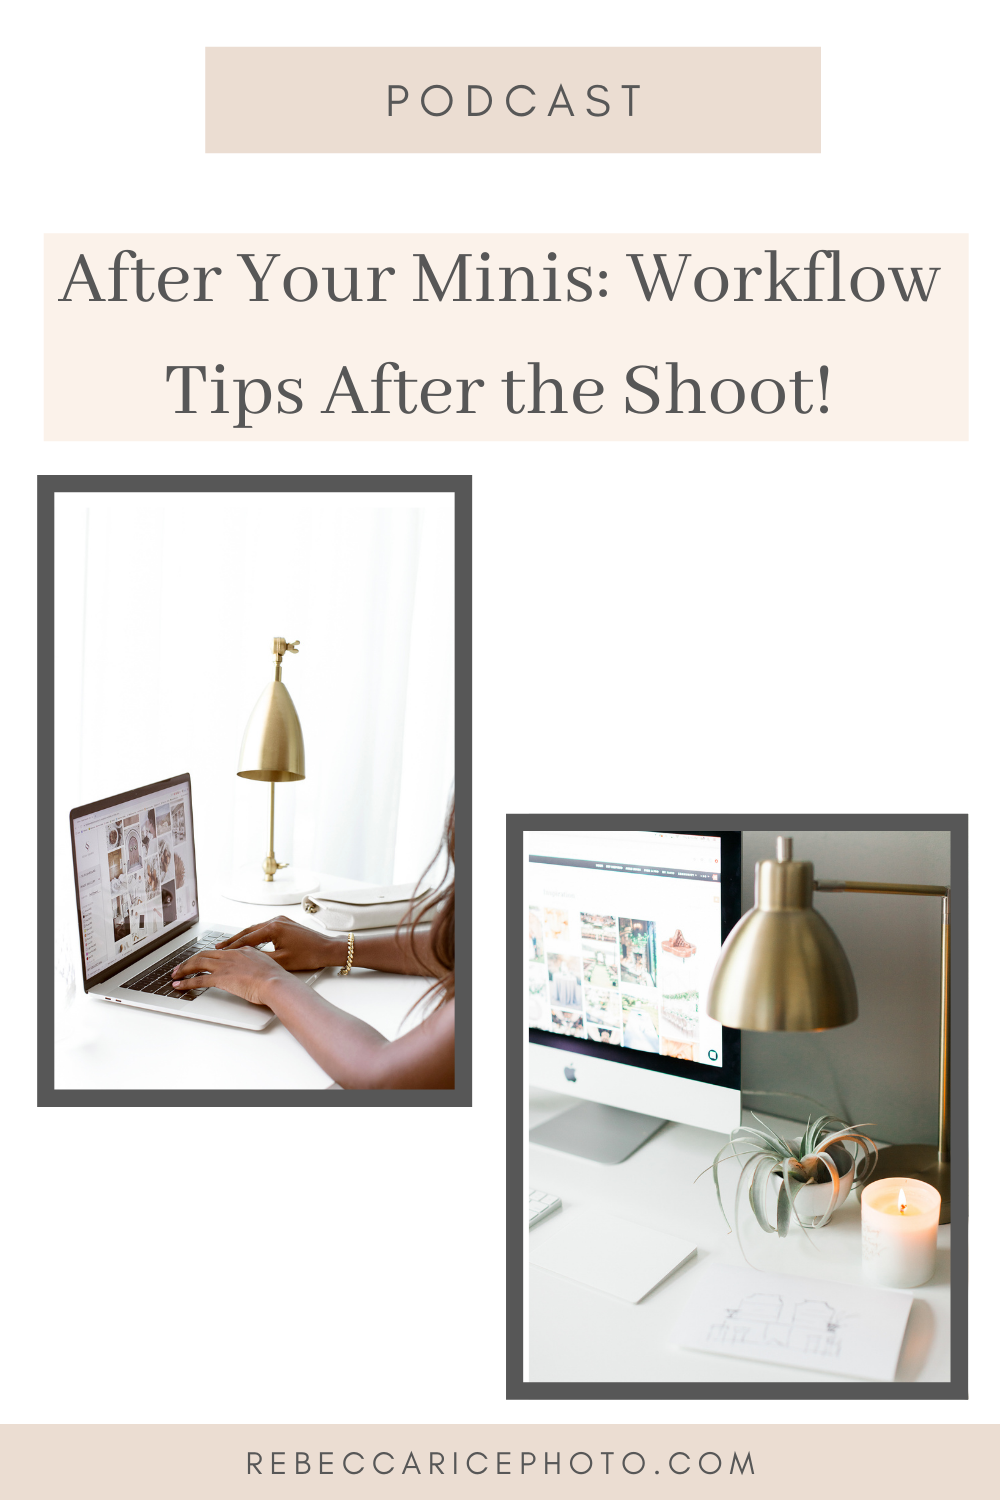 Workflow tips for after your mini sessions from The Business Journey Podcast, episode 39, by Rebecca Rice Photography